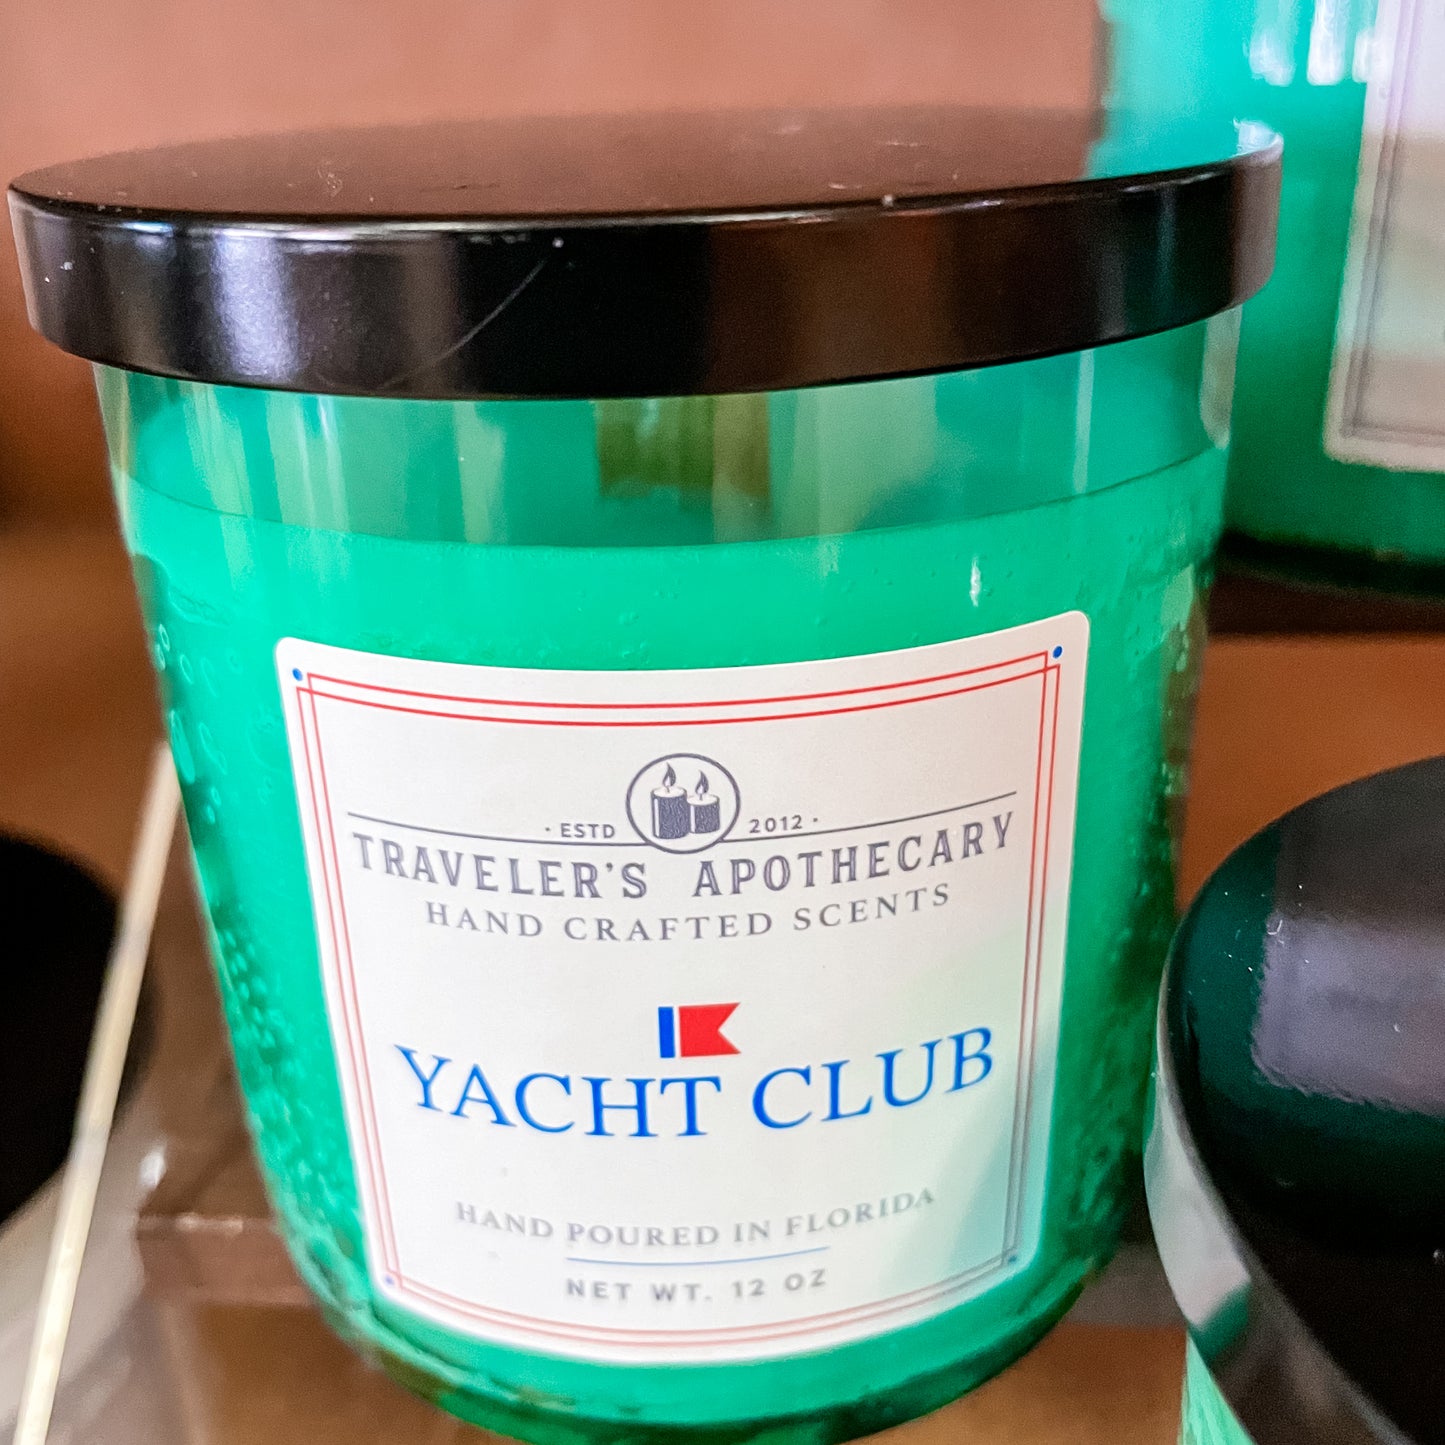 Traveler's Apothecary - Yacht Club 12 Oz Candle